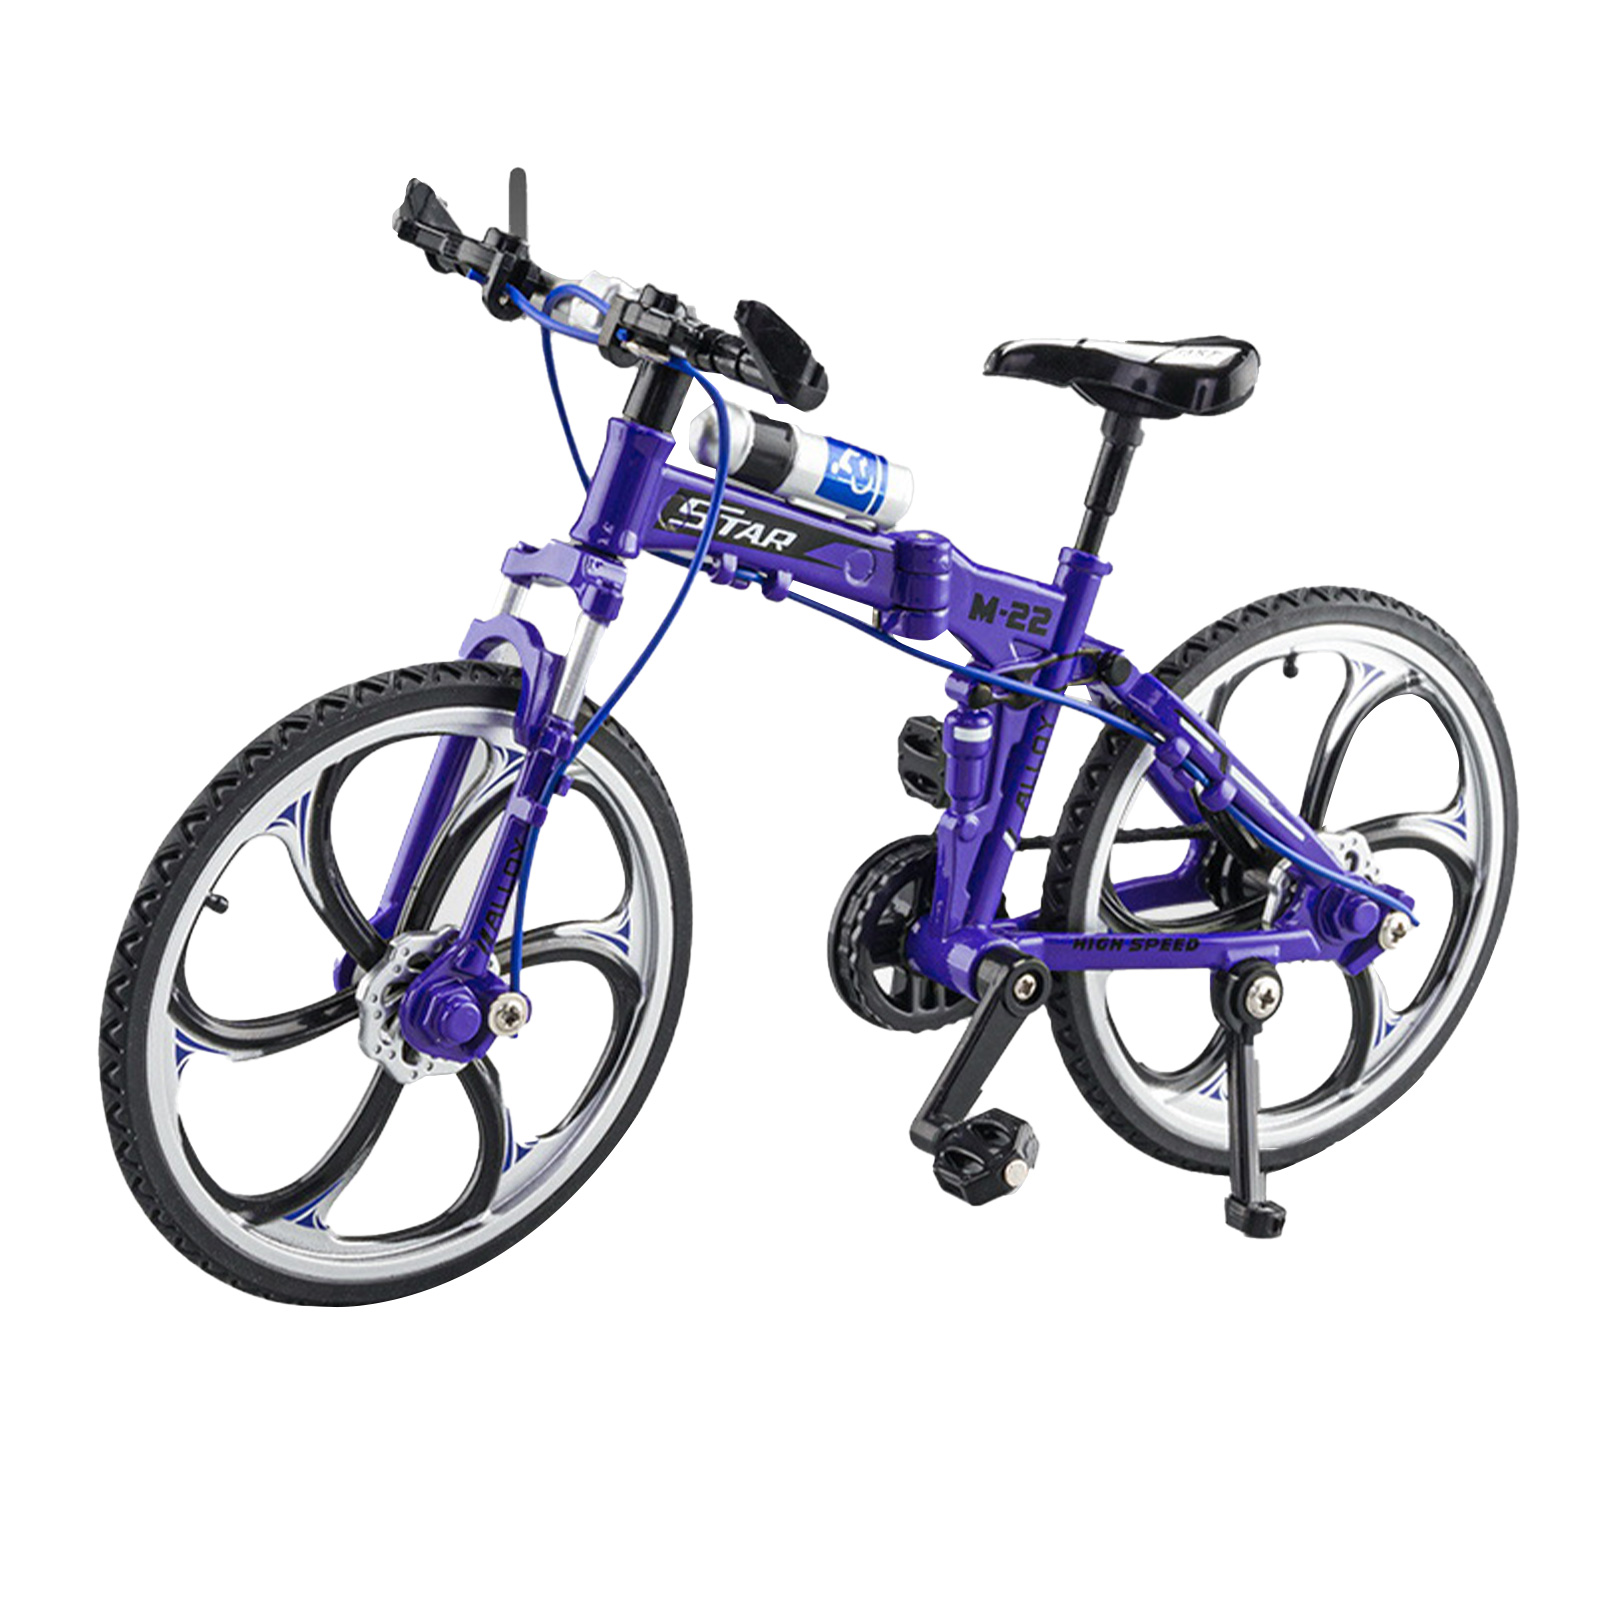 1/8 Alloy Mountain Bike Model Simulation Sliding Steering Mtb Bicycle Toys For Children Gifts Collection